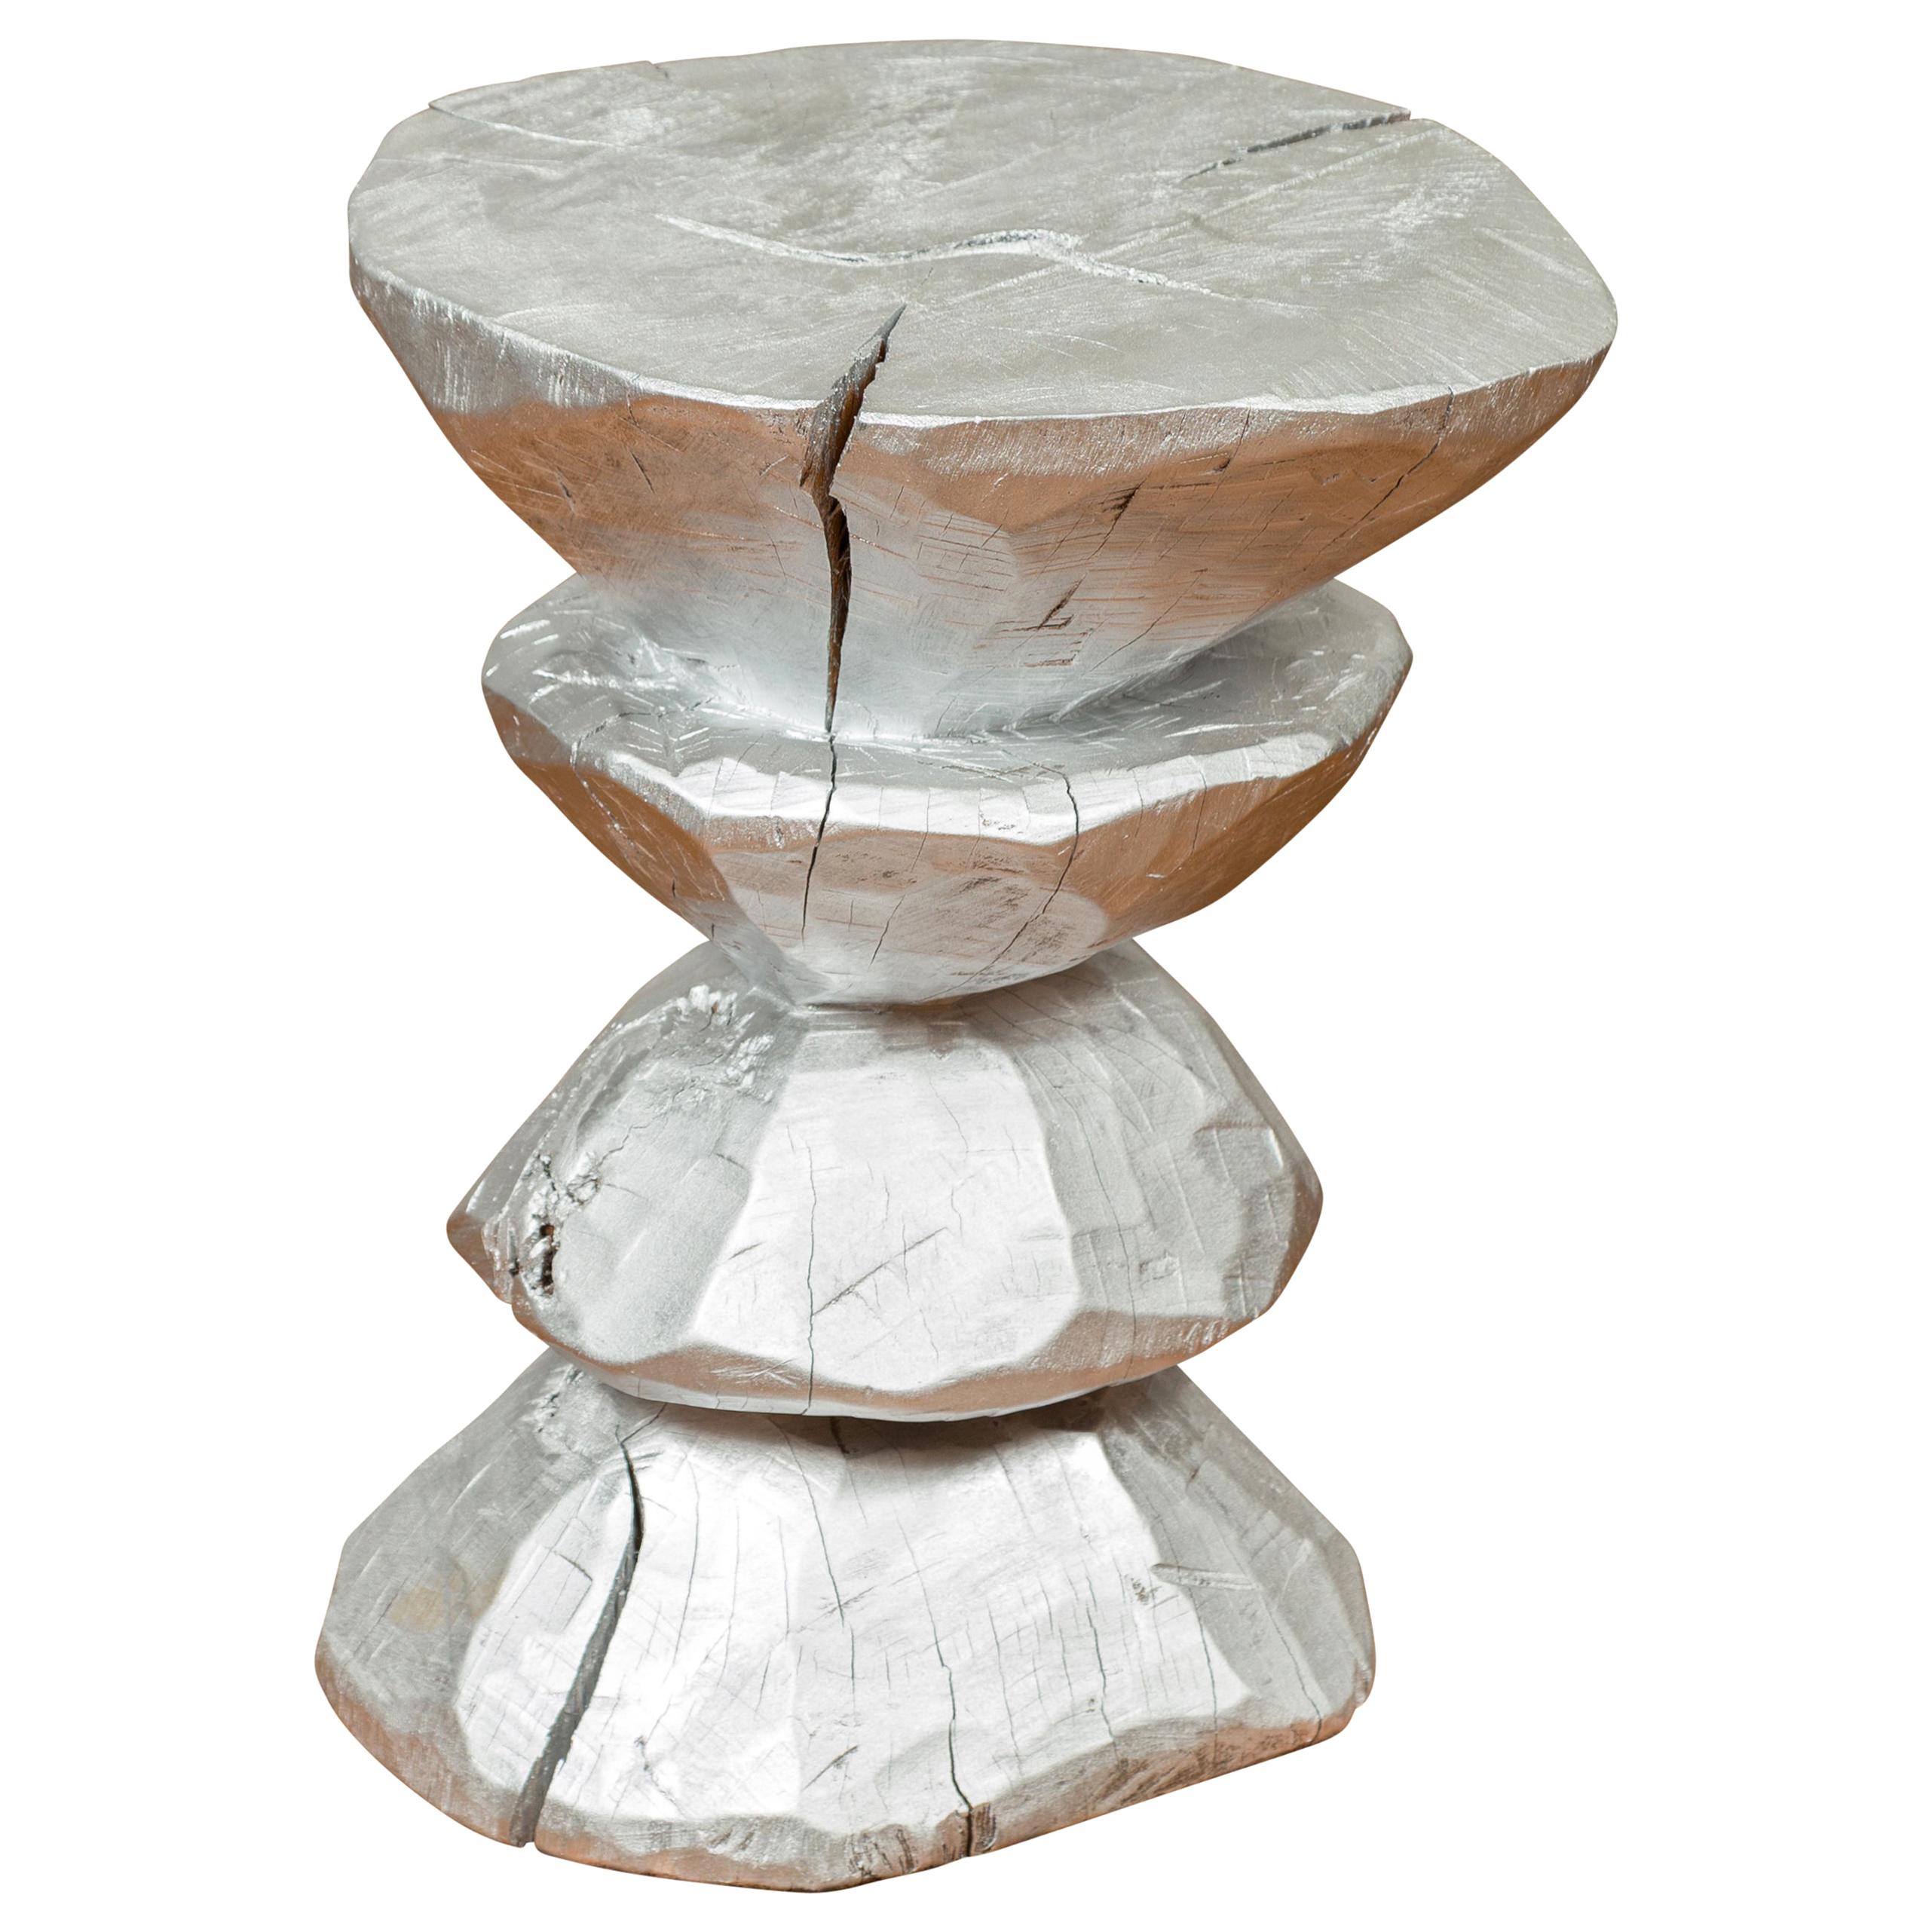 Contemporary Indonesian Silver-Colored Pedestal with Hourglass-Inspired Shape